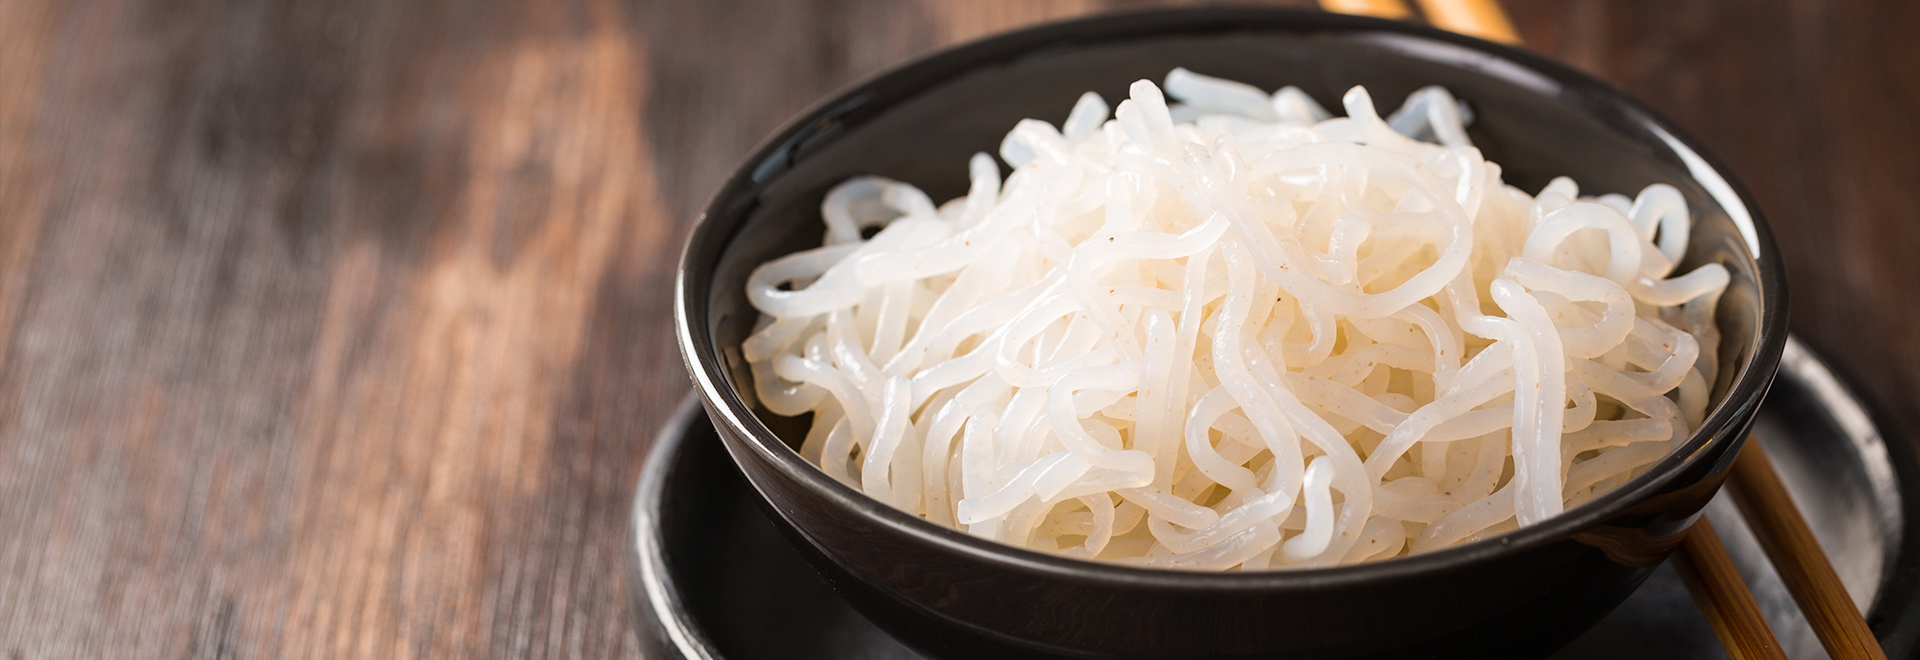 benefits-of-konjac-noodles-and-diet-tips